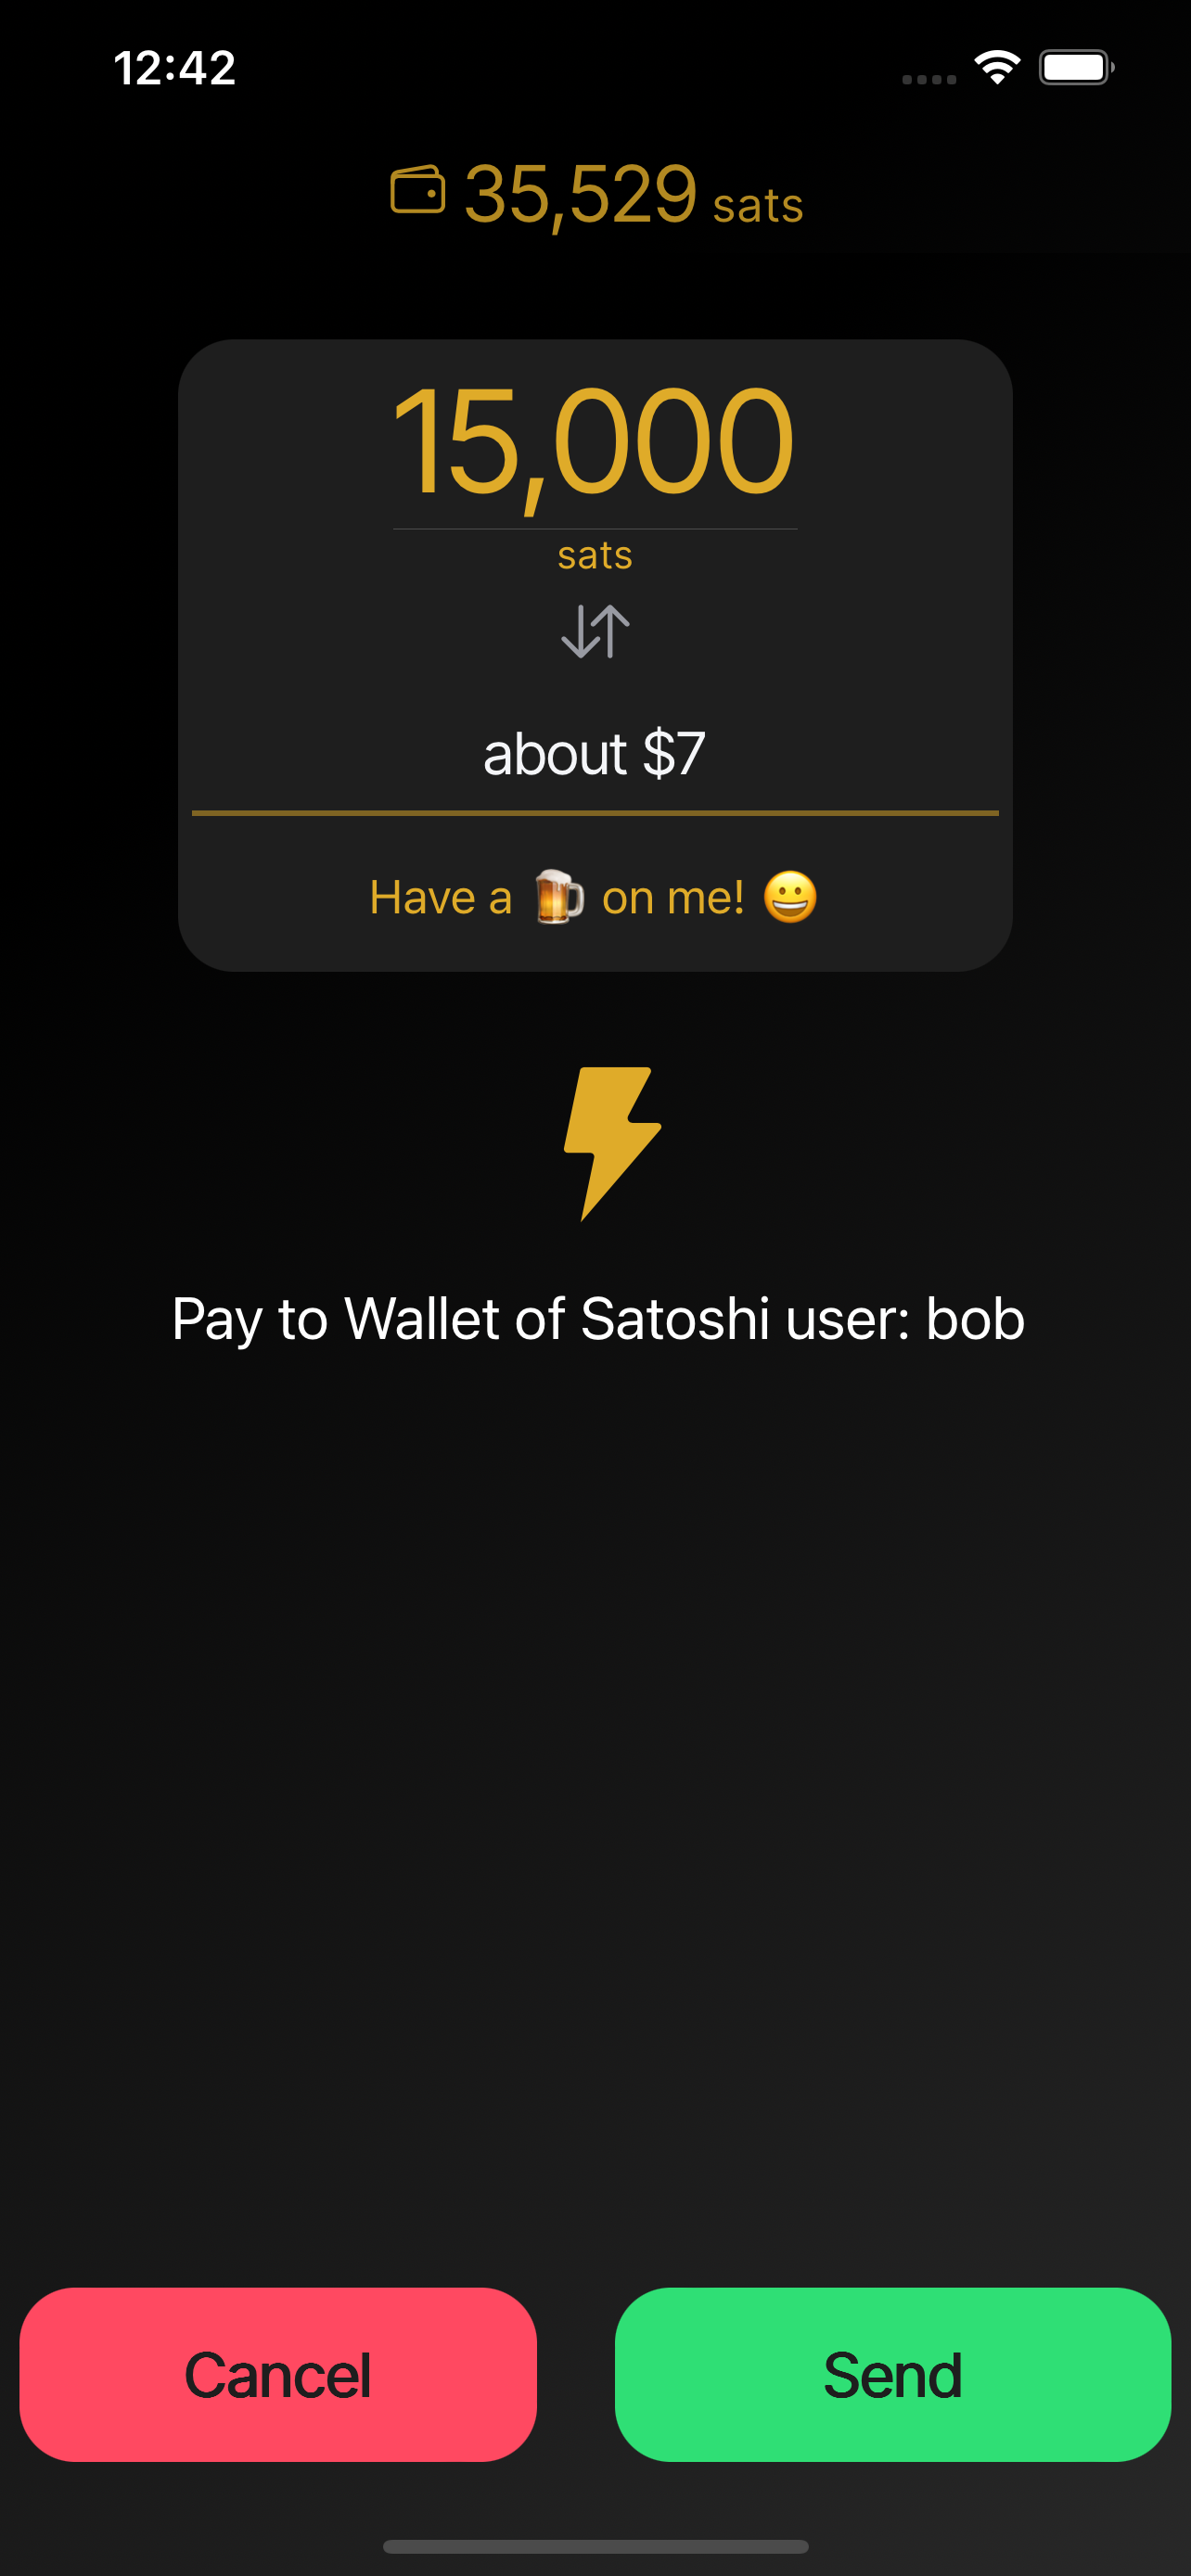 Lightning Wallet - Bitcoin wallet for iOS and Android